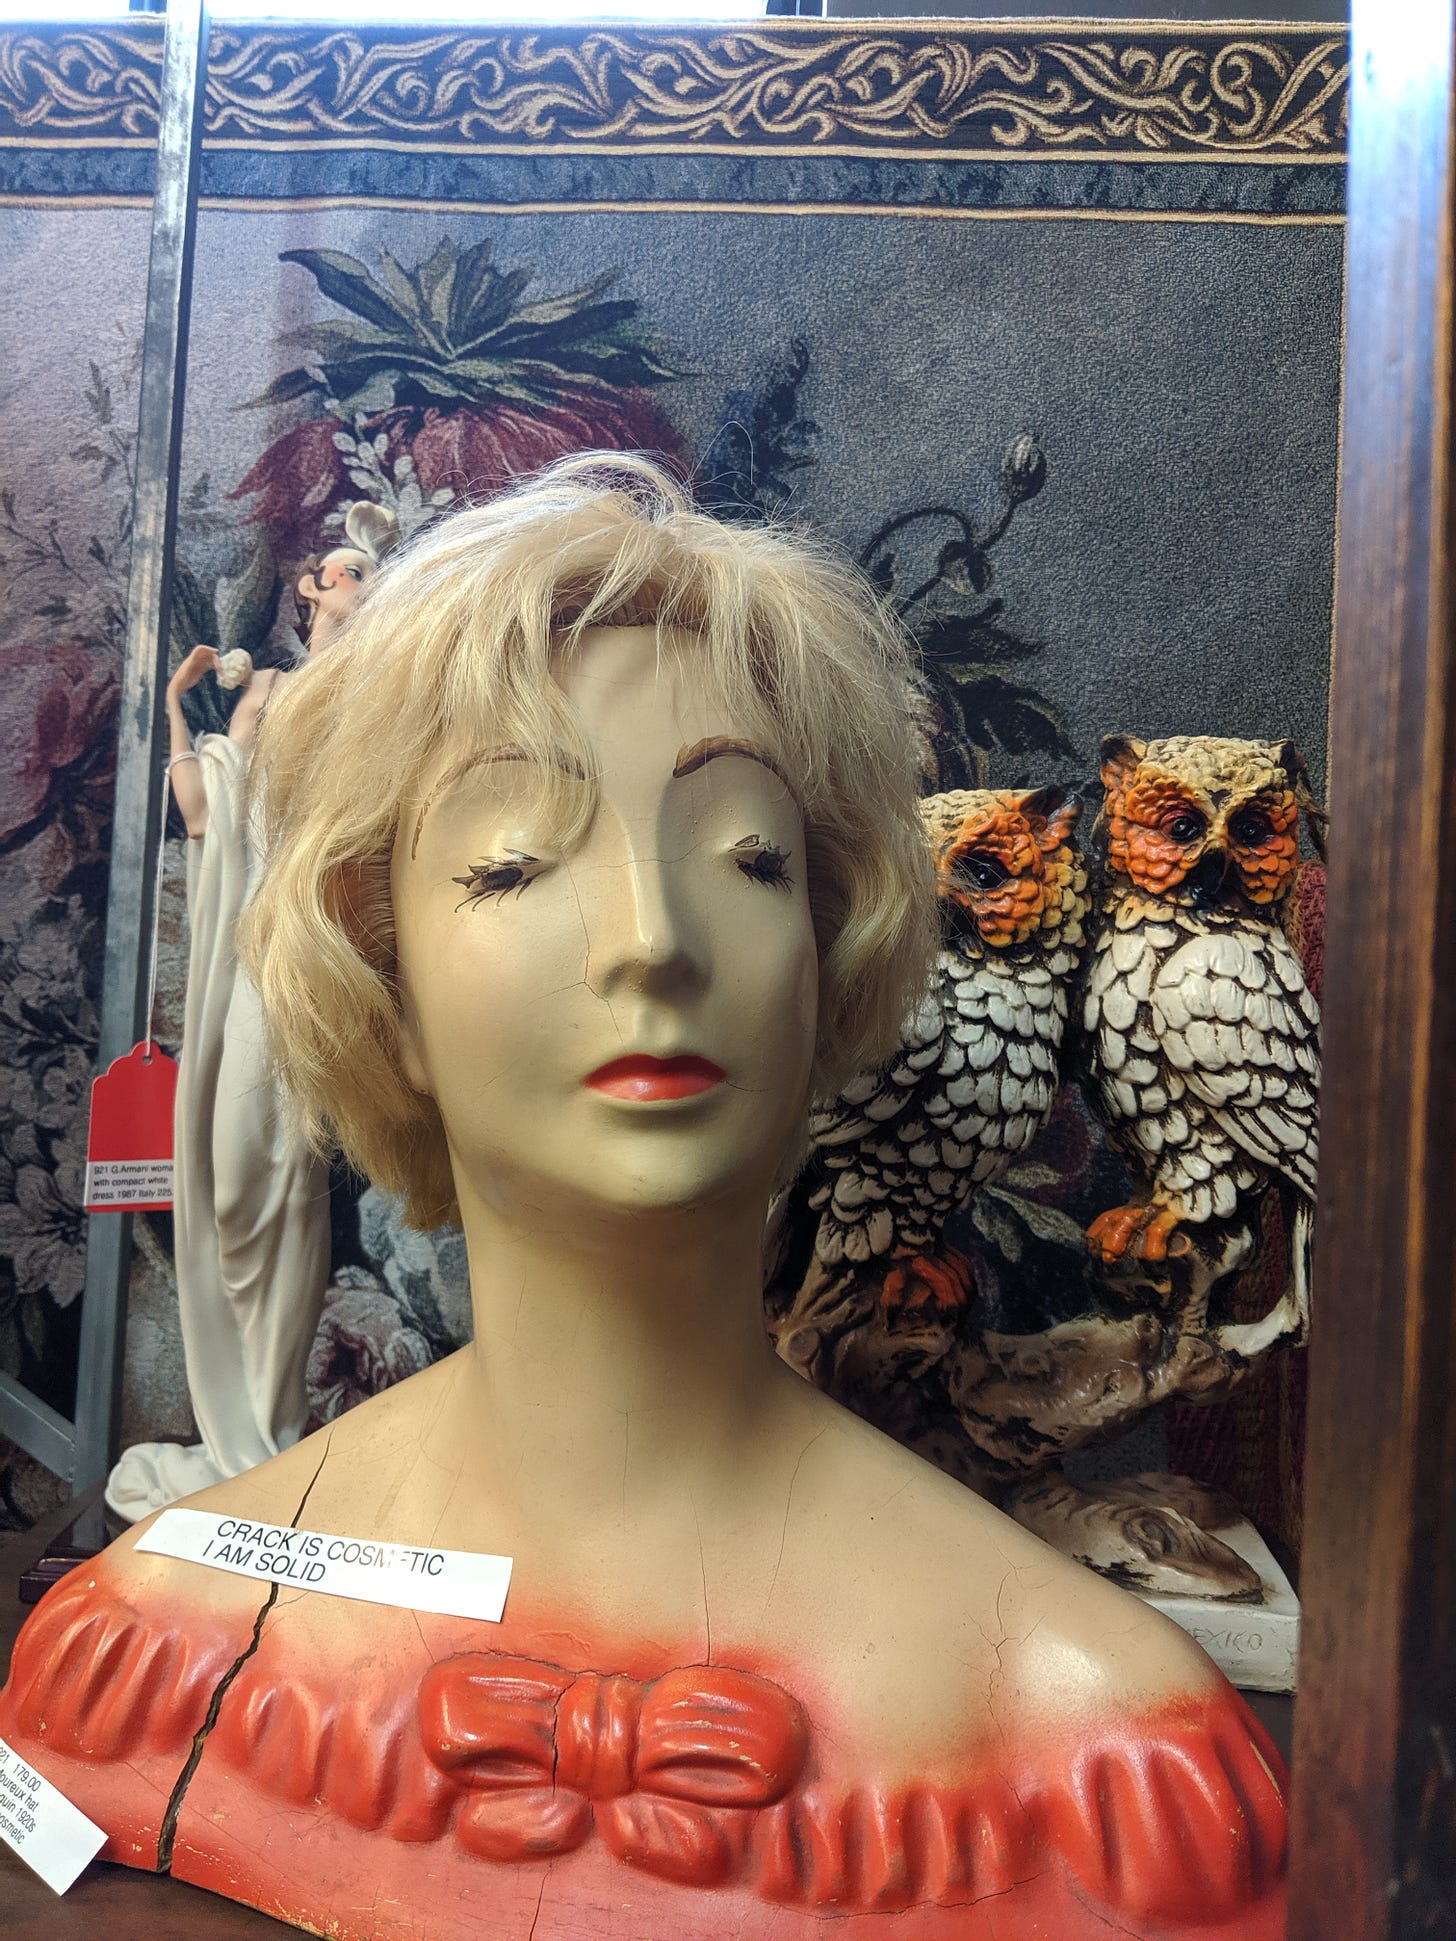 Photograph: a vintage mannequin head with closed eyes, creepy long eyelashes and blond hair (a wig?); figure is cracked, and a note on the figure says "CRACK IS COSMETIC / I AM SOLID"